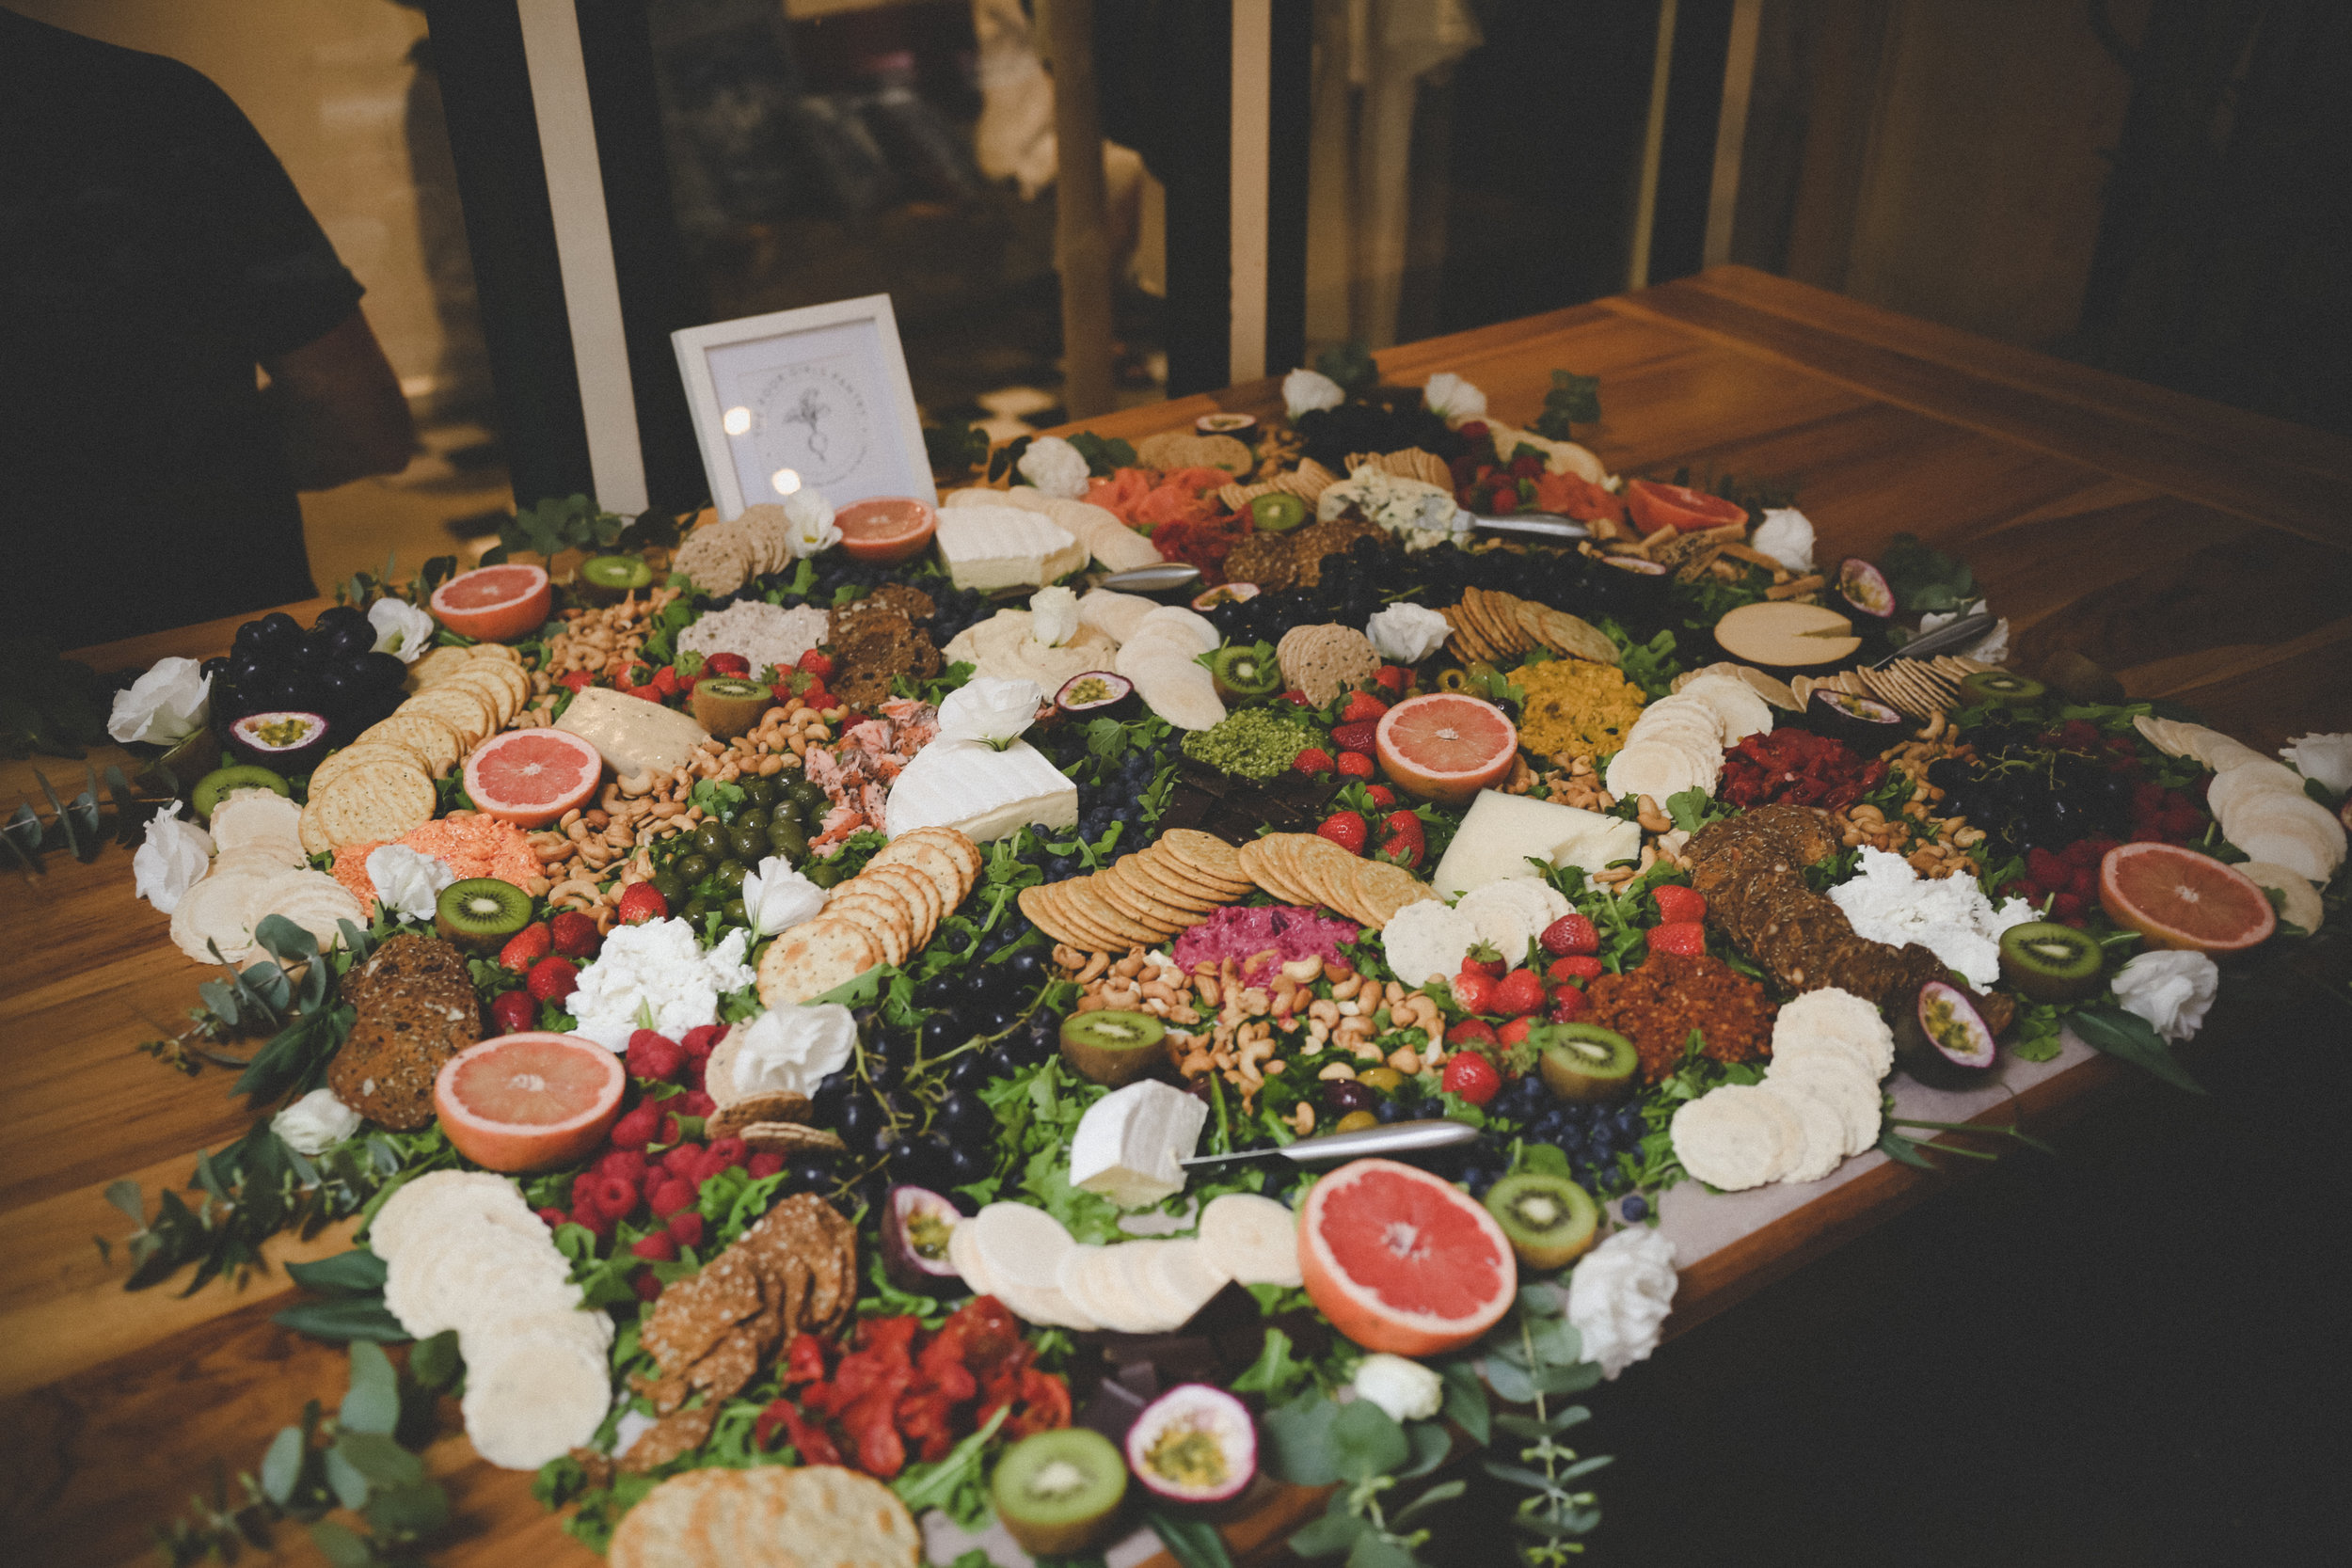 The Poor Girl's Pantry tasty spread at Surf Legend's LoungePhoto by Gabe Ryan @guppadie